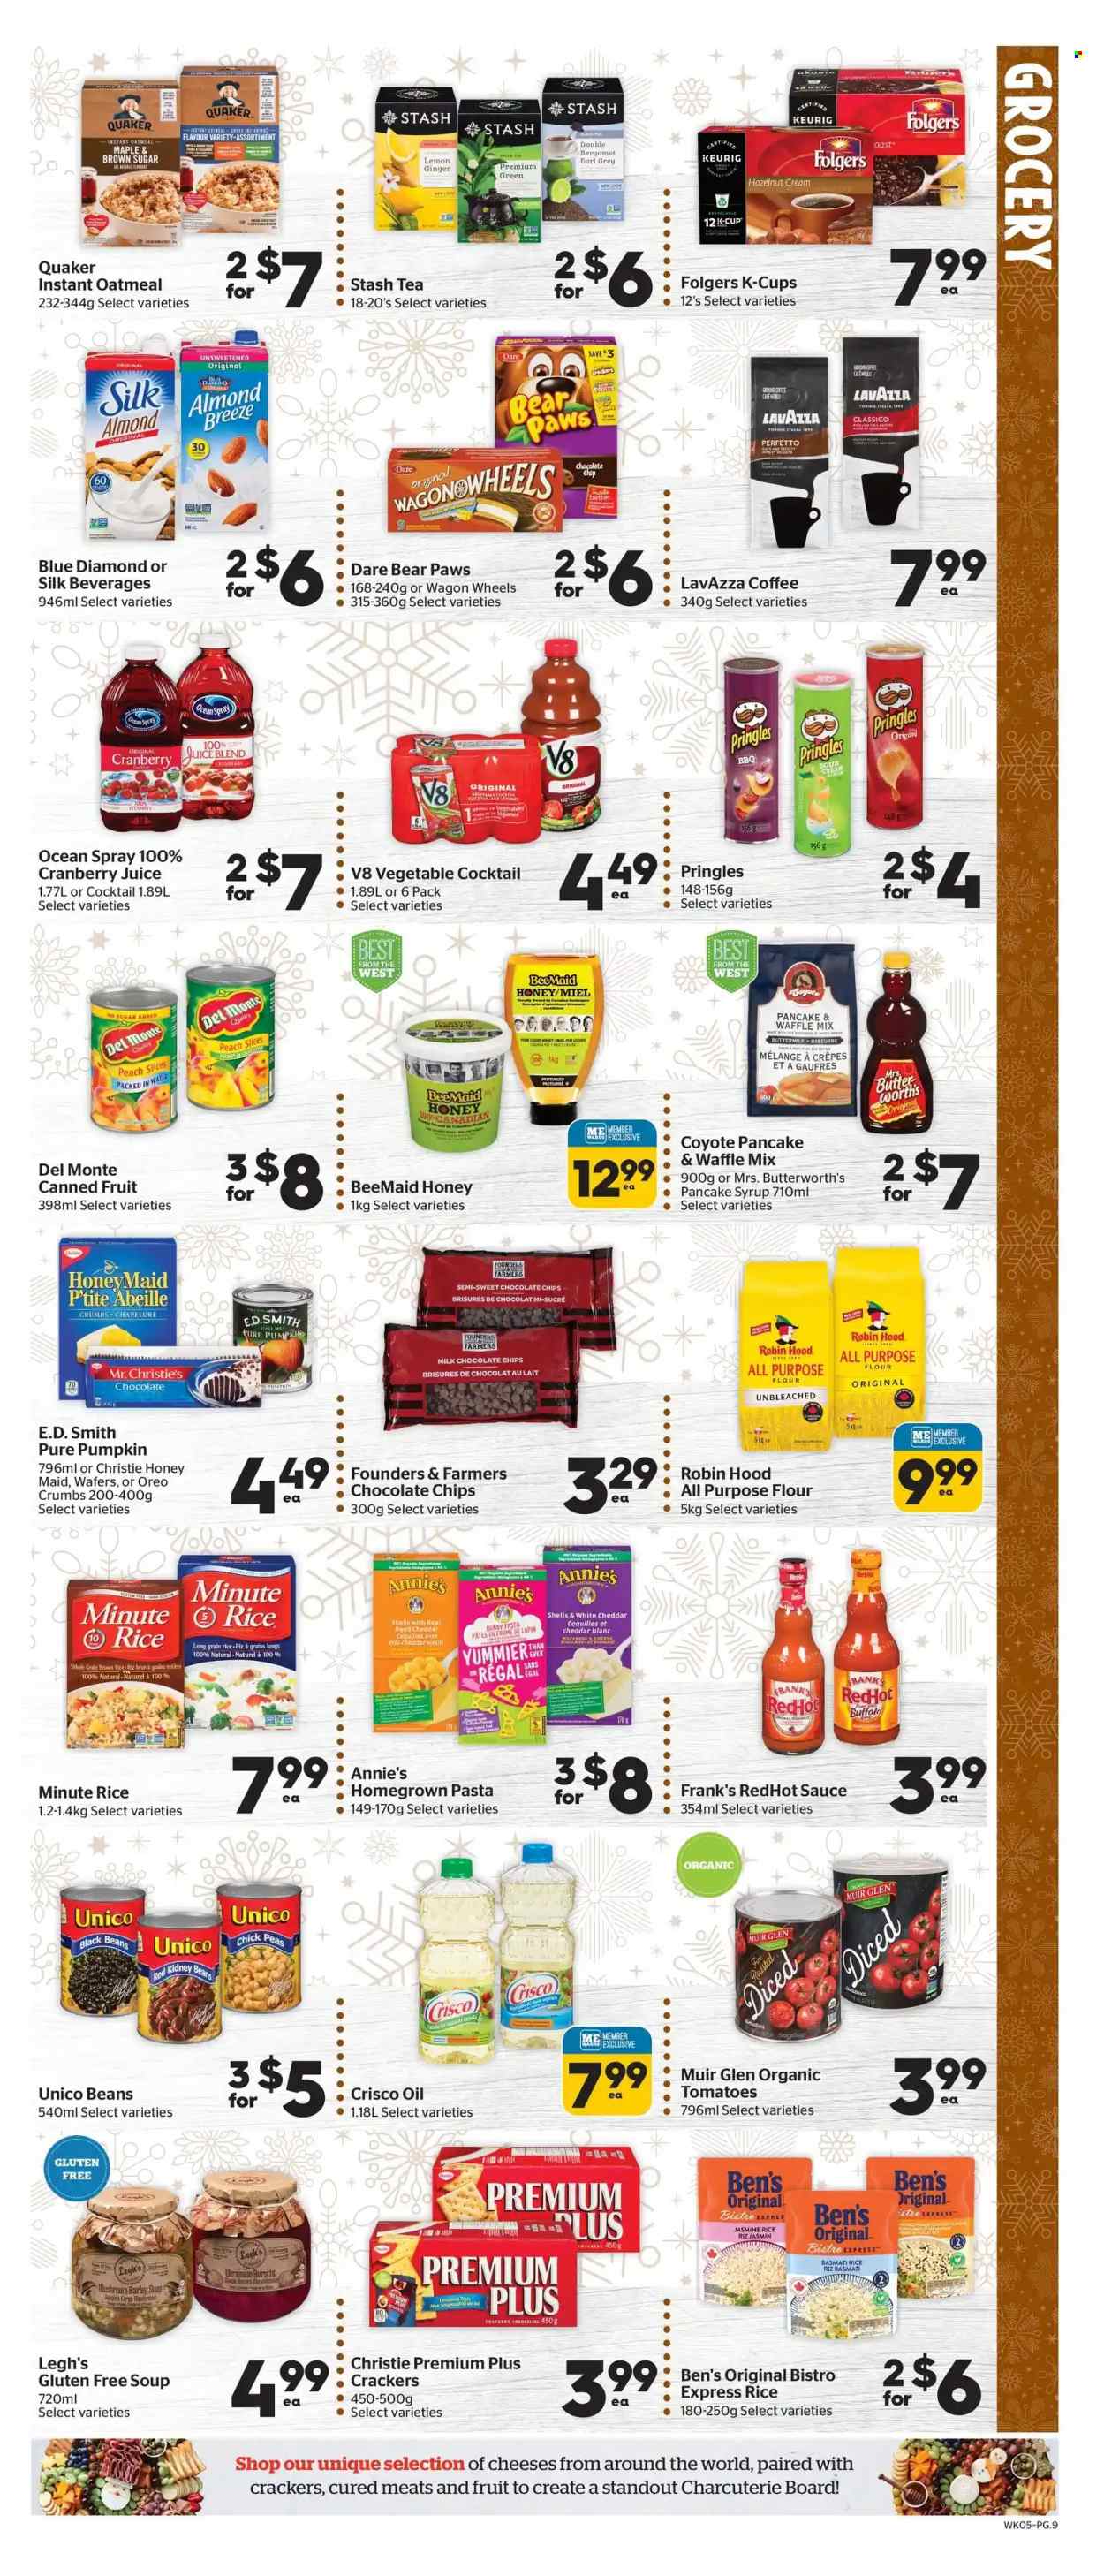 thumbnail - Calgary Co-op Flyer - December 01, 2022 - December 07, 2022 - Sales products - mushrooms, ginger, pumpkin, peas, soup, pasta, sauce, Quaker, Annie's, cheese, buttermilk, milk chocolate, wafers, crackers, Pringles, all purpose flour, Crisco, flour, oatmeal, canned fruit, Del Monte, Honey Maid, basmati rice, brown rice, rice, jasmine rice, long grain rice, Classico, oil, pancake syrup, syrup, Blue Diamond, cranberry juice, juice, tea, coffee, Folgers, ground coffee, coffee capsules, K-Cups, Keurig, Lavazza, Paws, vitamin c, Oreo. Page 12.